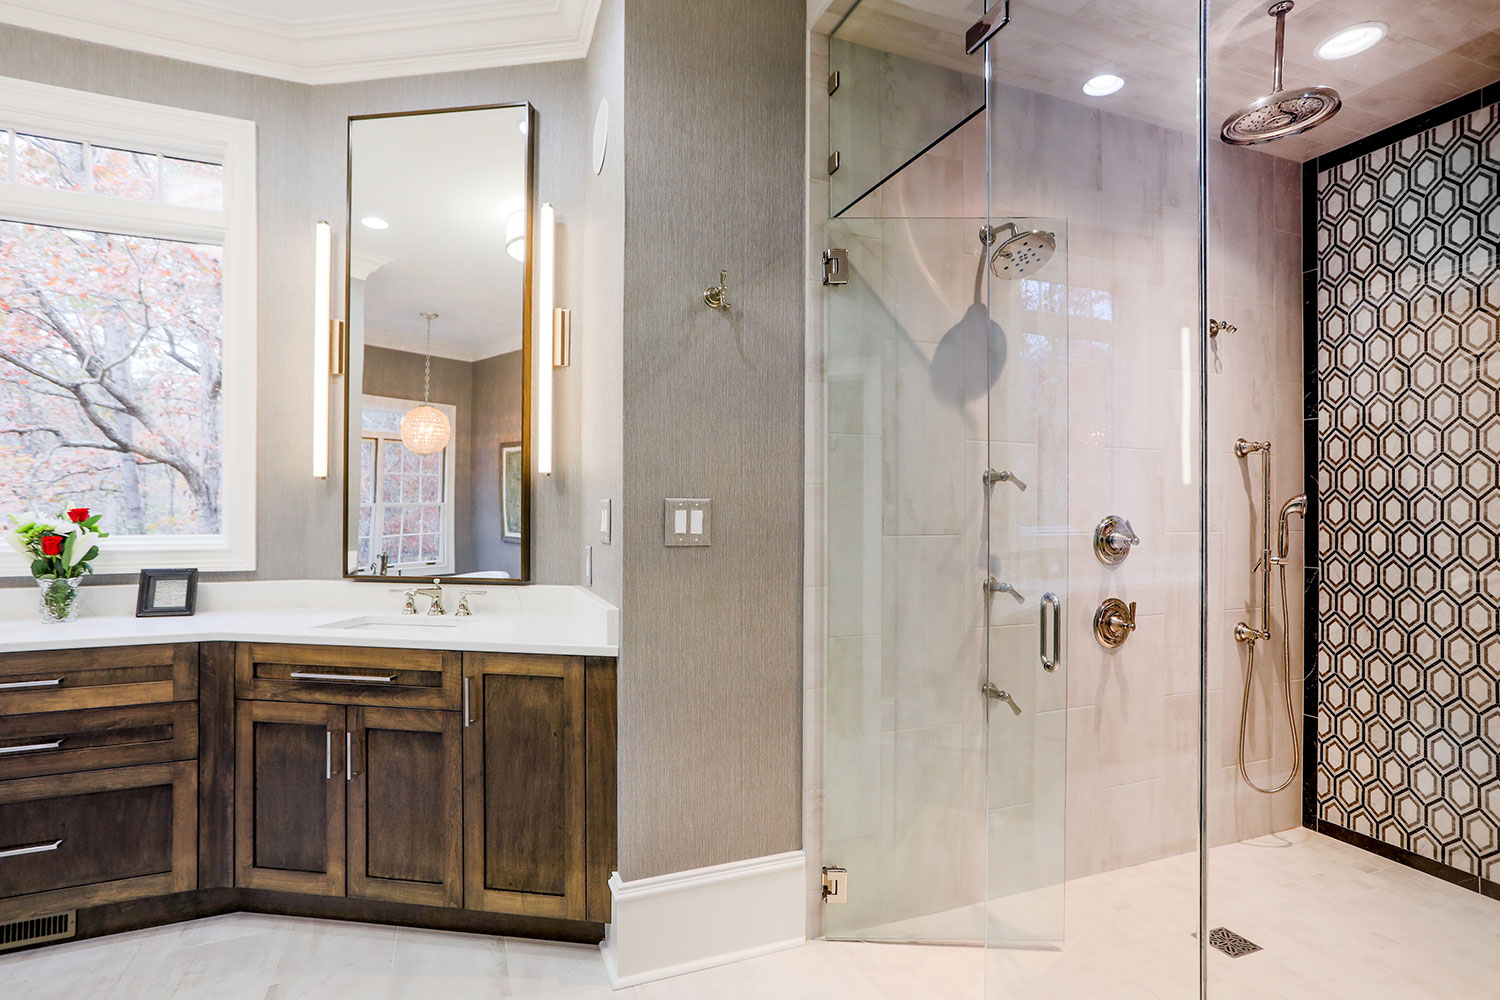 Bathrooms_5: Hodge Design and Remodeling